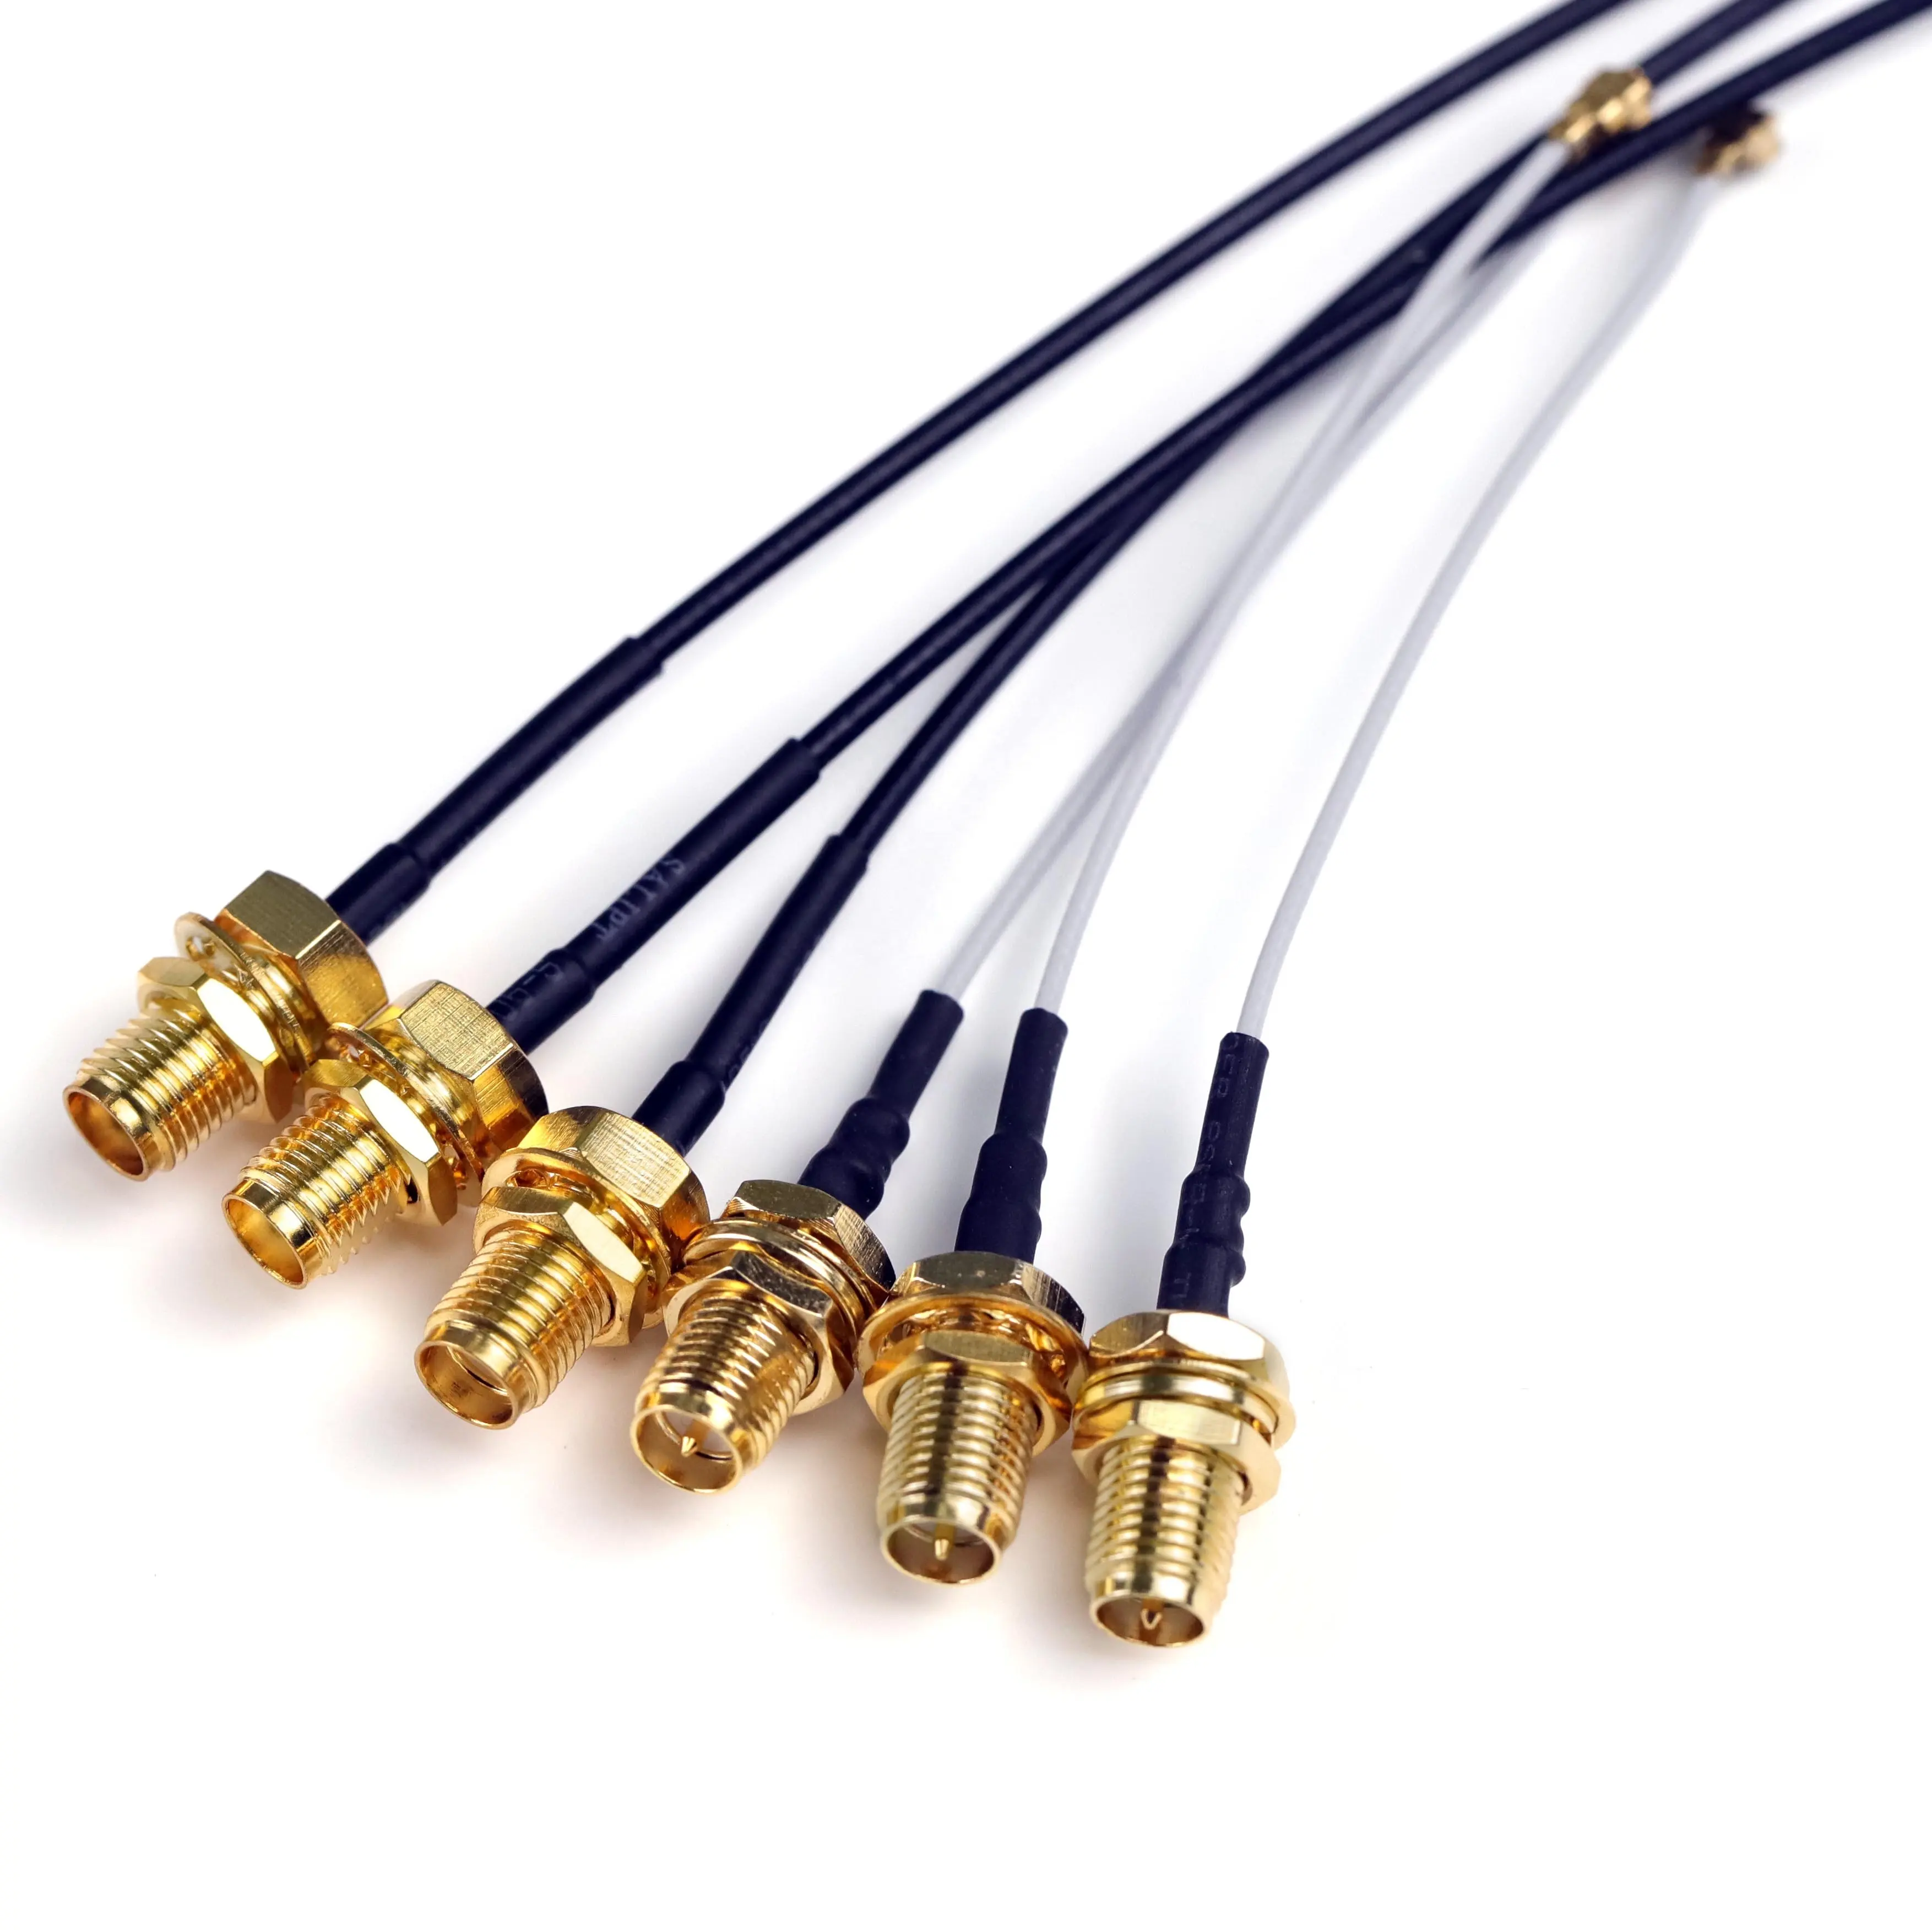 RF1.13 IPEX to SMA-K Antenna WiFi Pigtail Cable 30cm IPEX To SMA Female RF Cables 10cm Length Gold Plated Connectors for